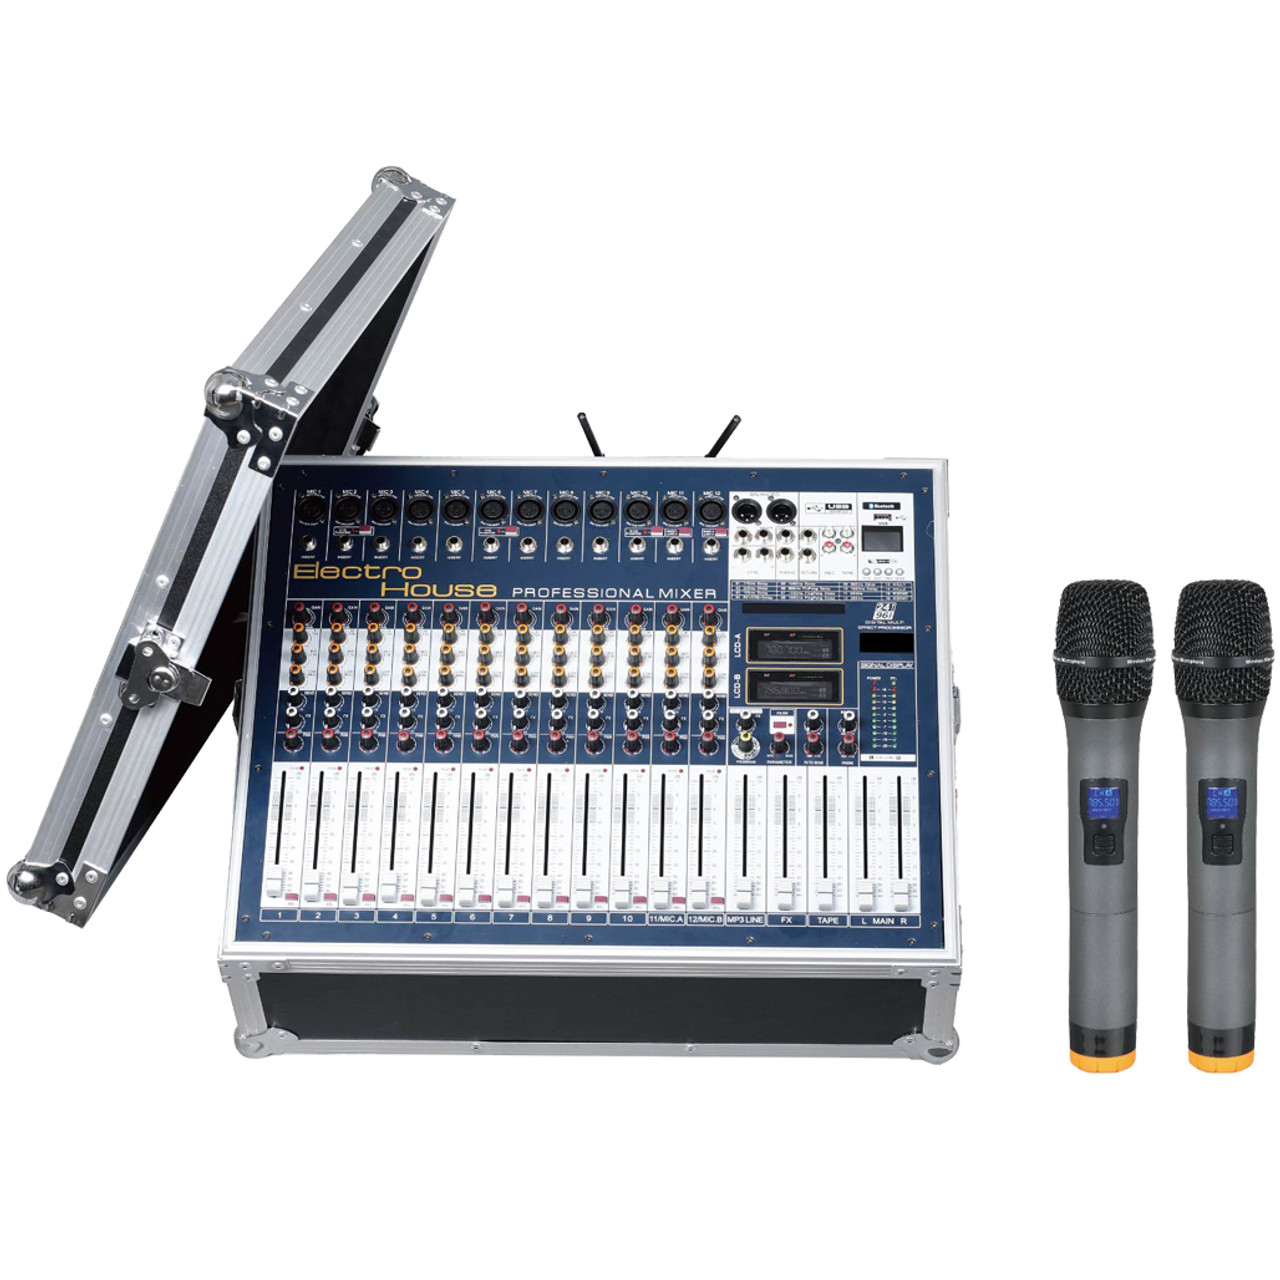 Professional 12-Channel Power Mixer with Microphone (B11)